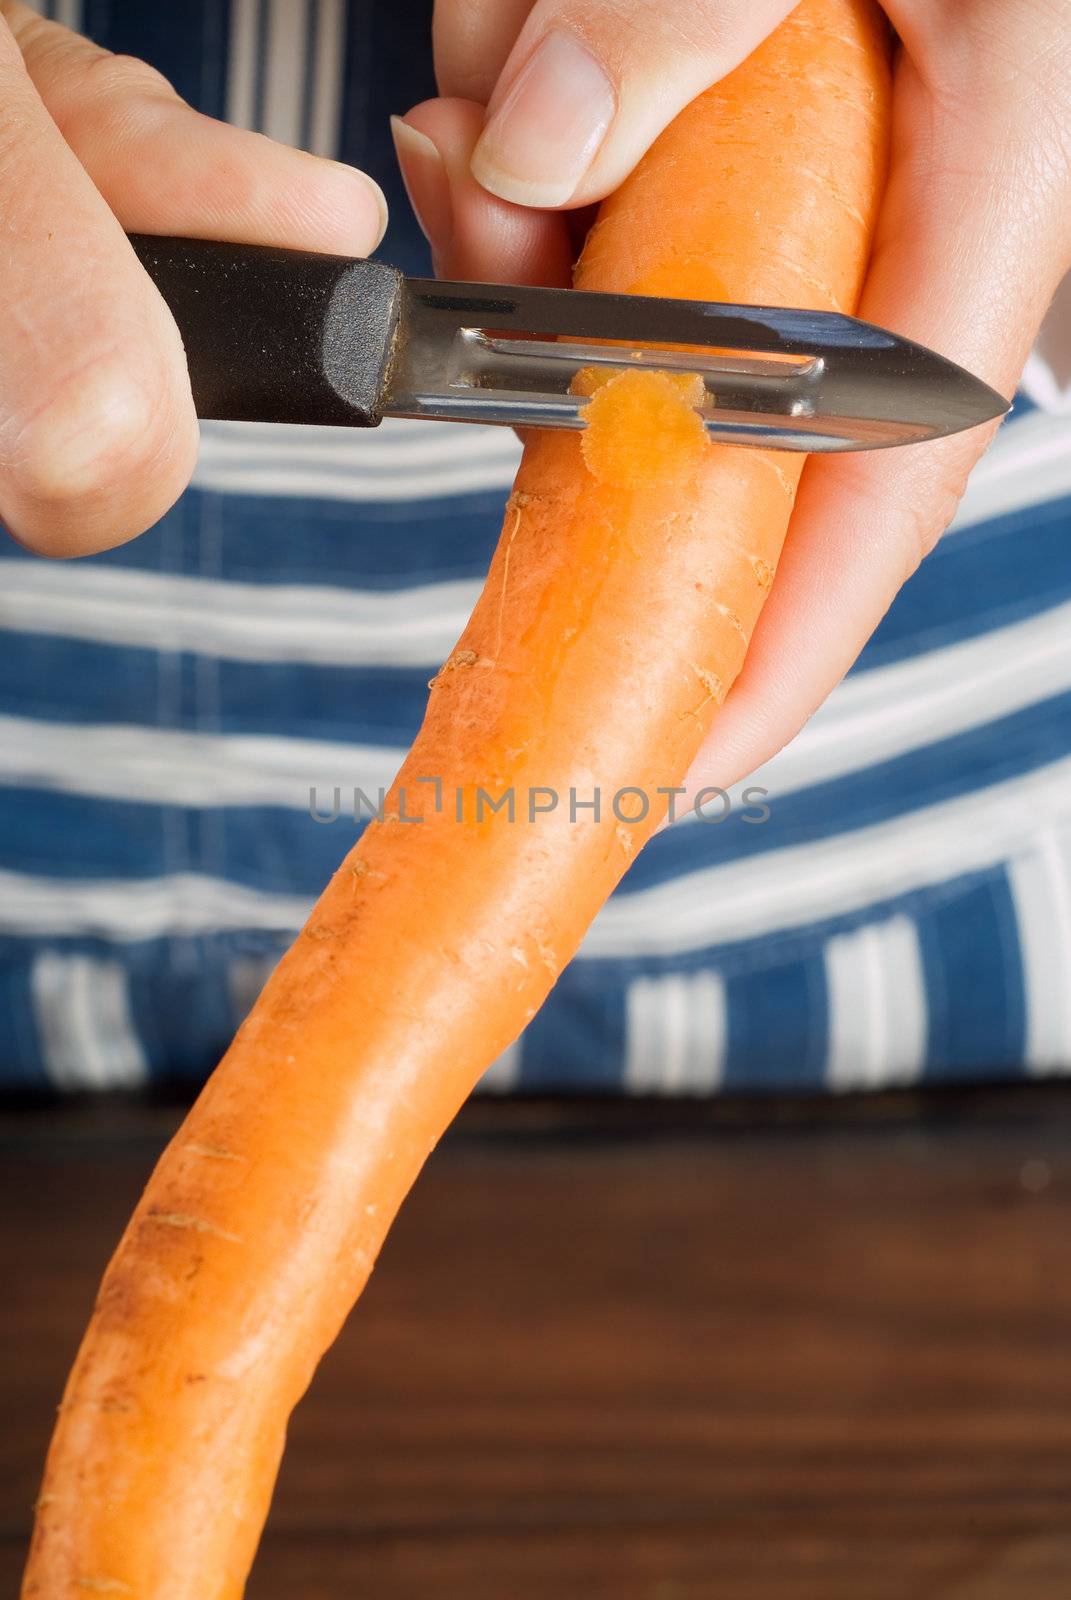 Peeling carrot by alistaircotton